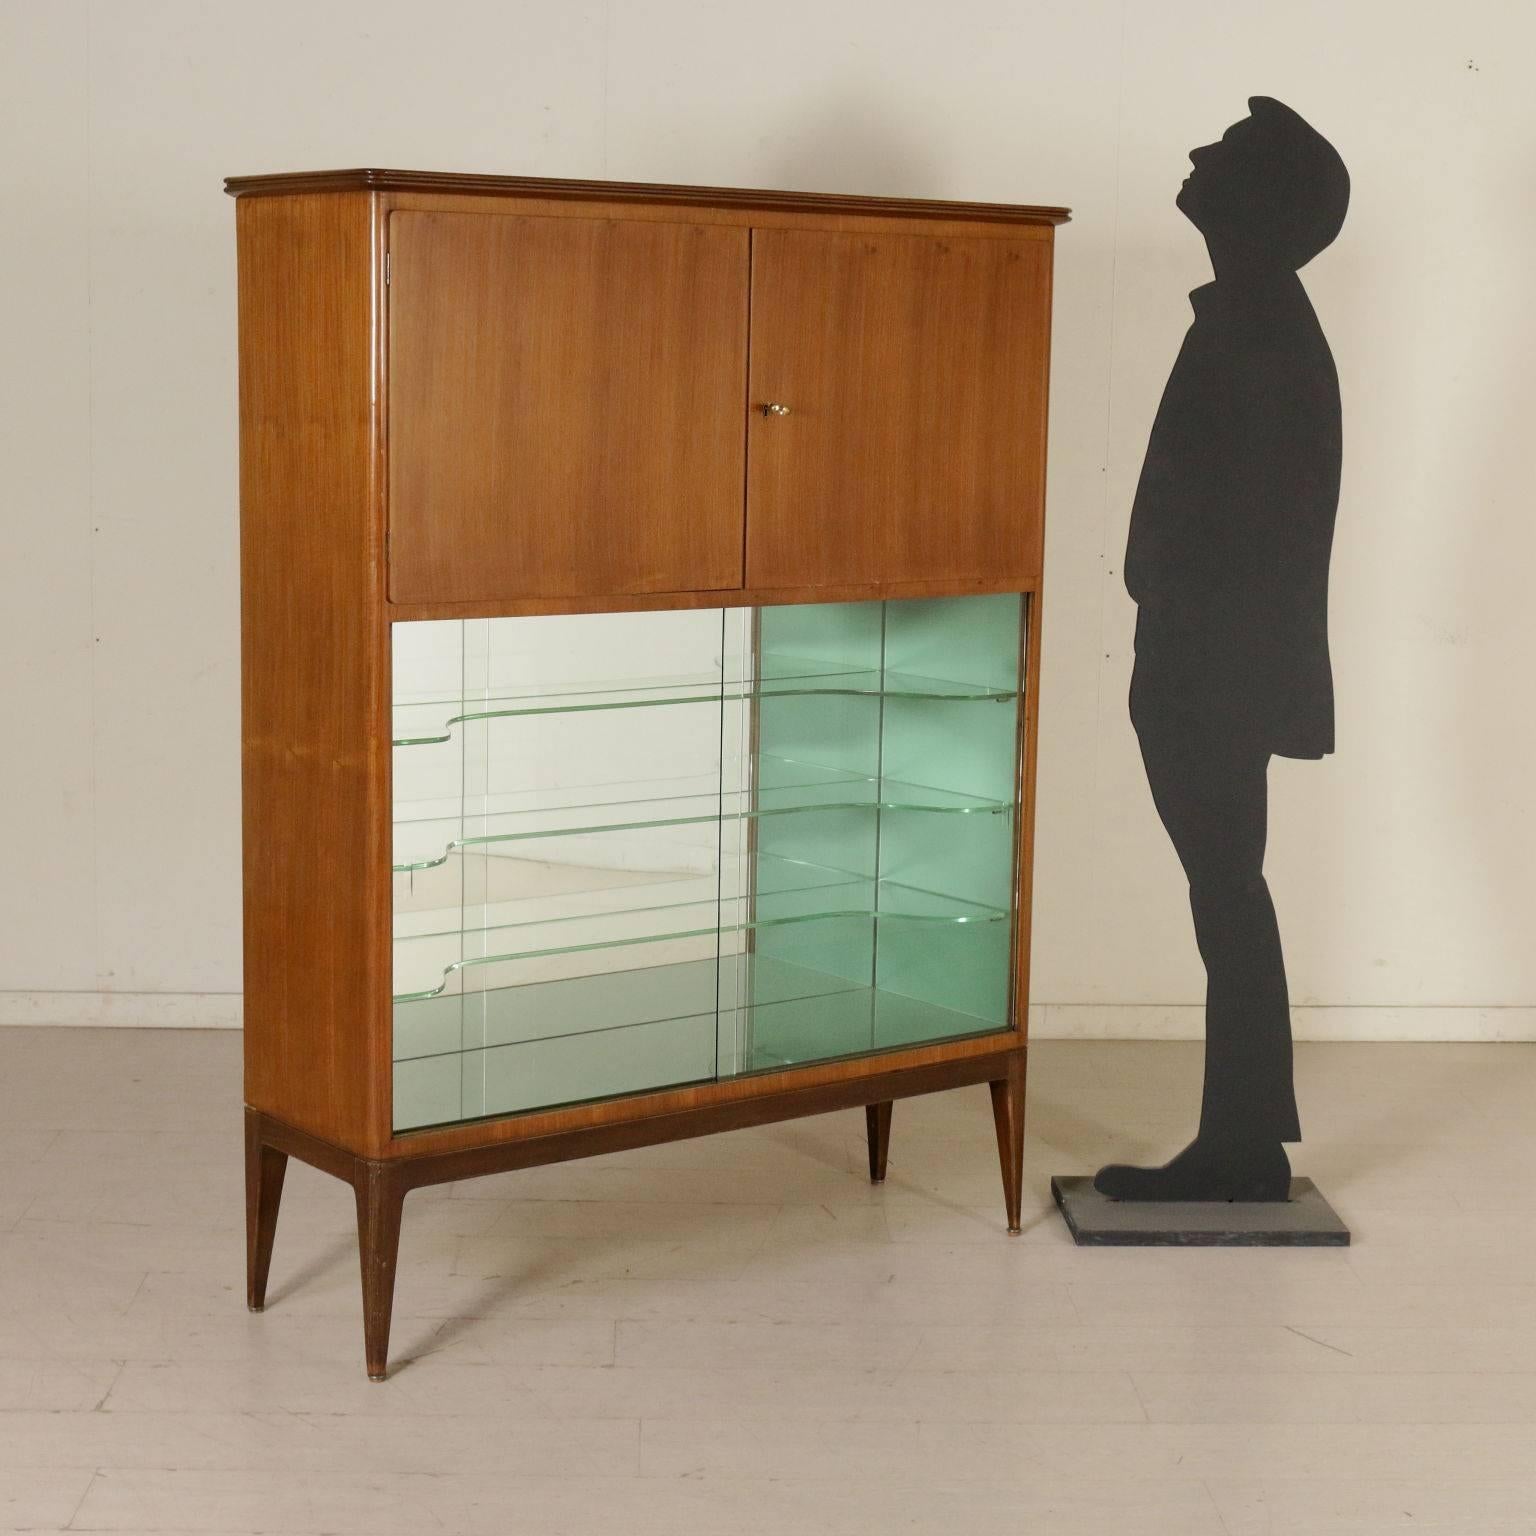 A bar cabinet, sliding glass doors in the lower part and wooden hinged doors in the upper part. Walnut veneer, glass shelves inside and mirrors. Manufactured in Italy, 1950s.